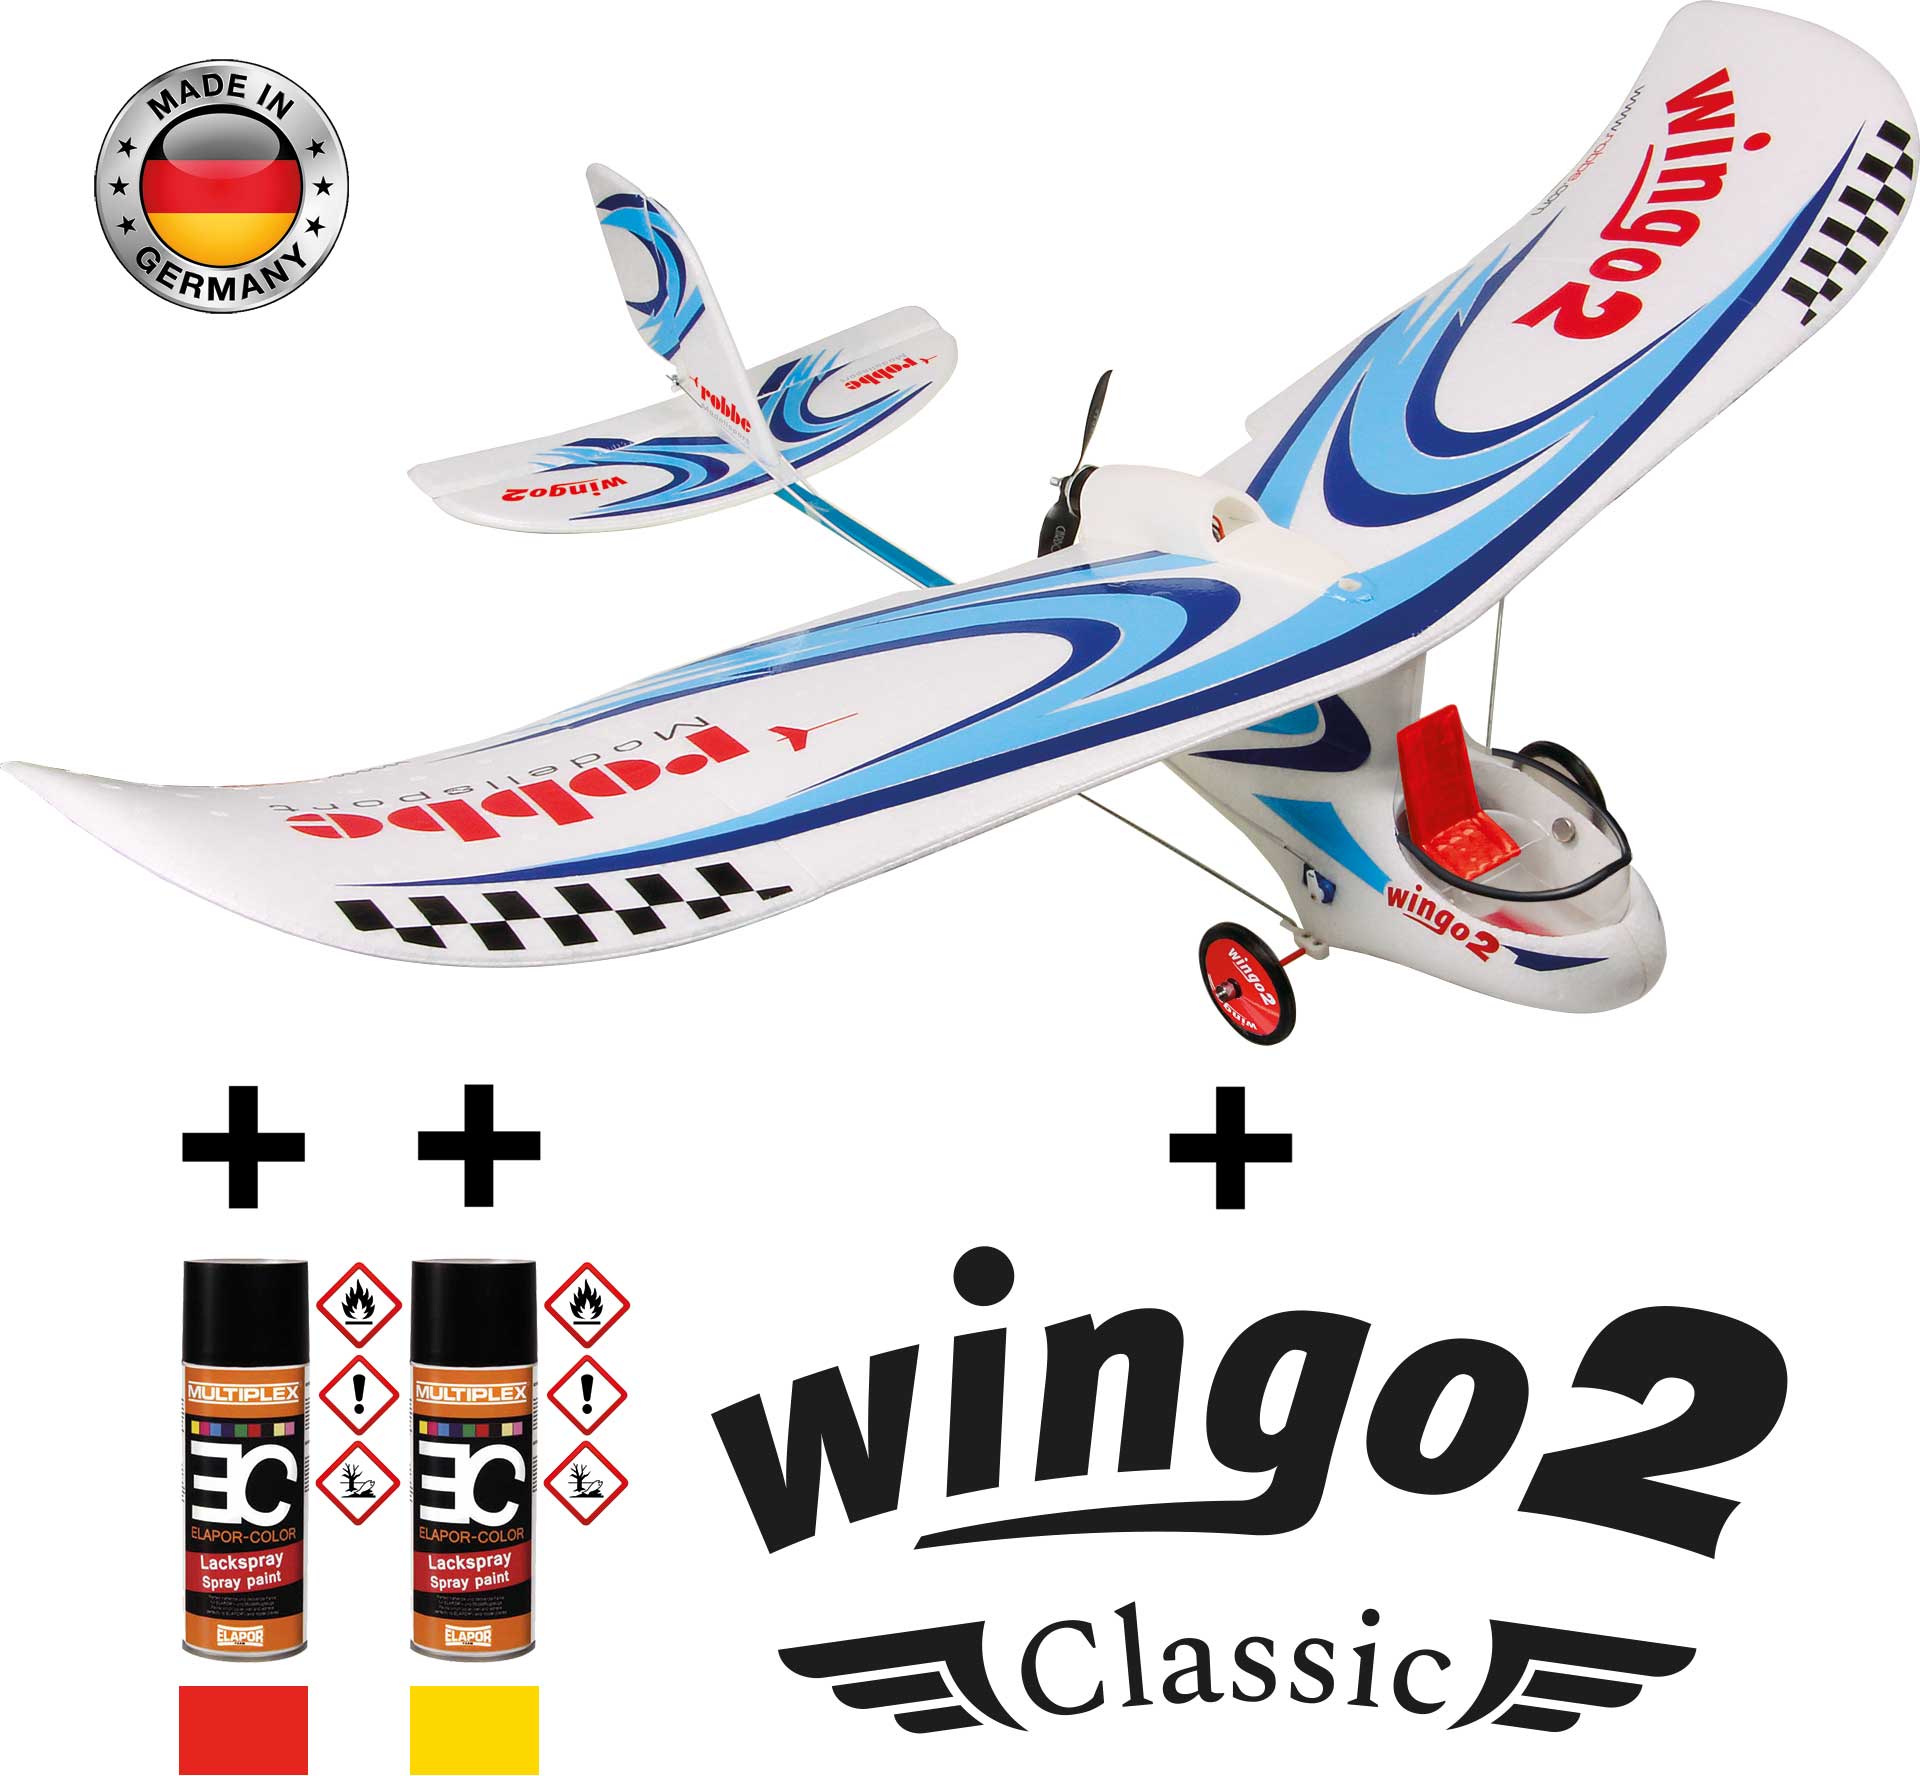 Robbe Modellsport Wingo 2 Kit "Classic" special version with "Classic" decor set and color spray red/yellow